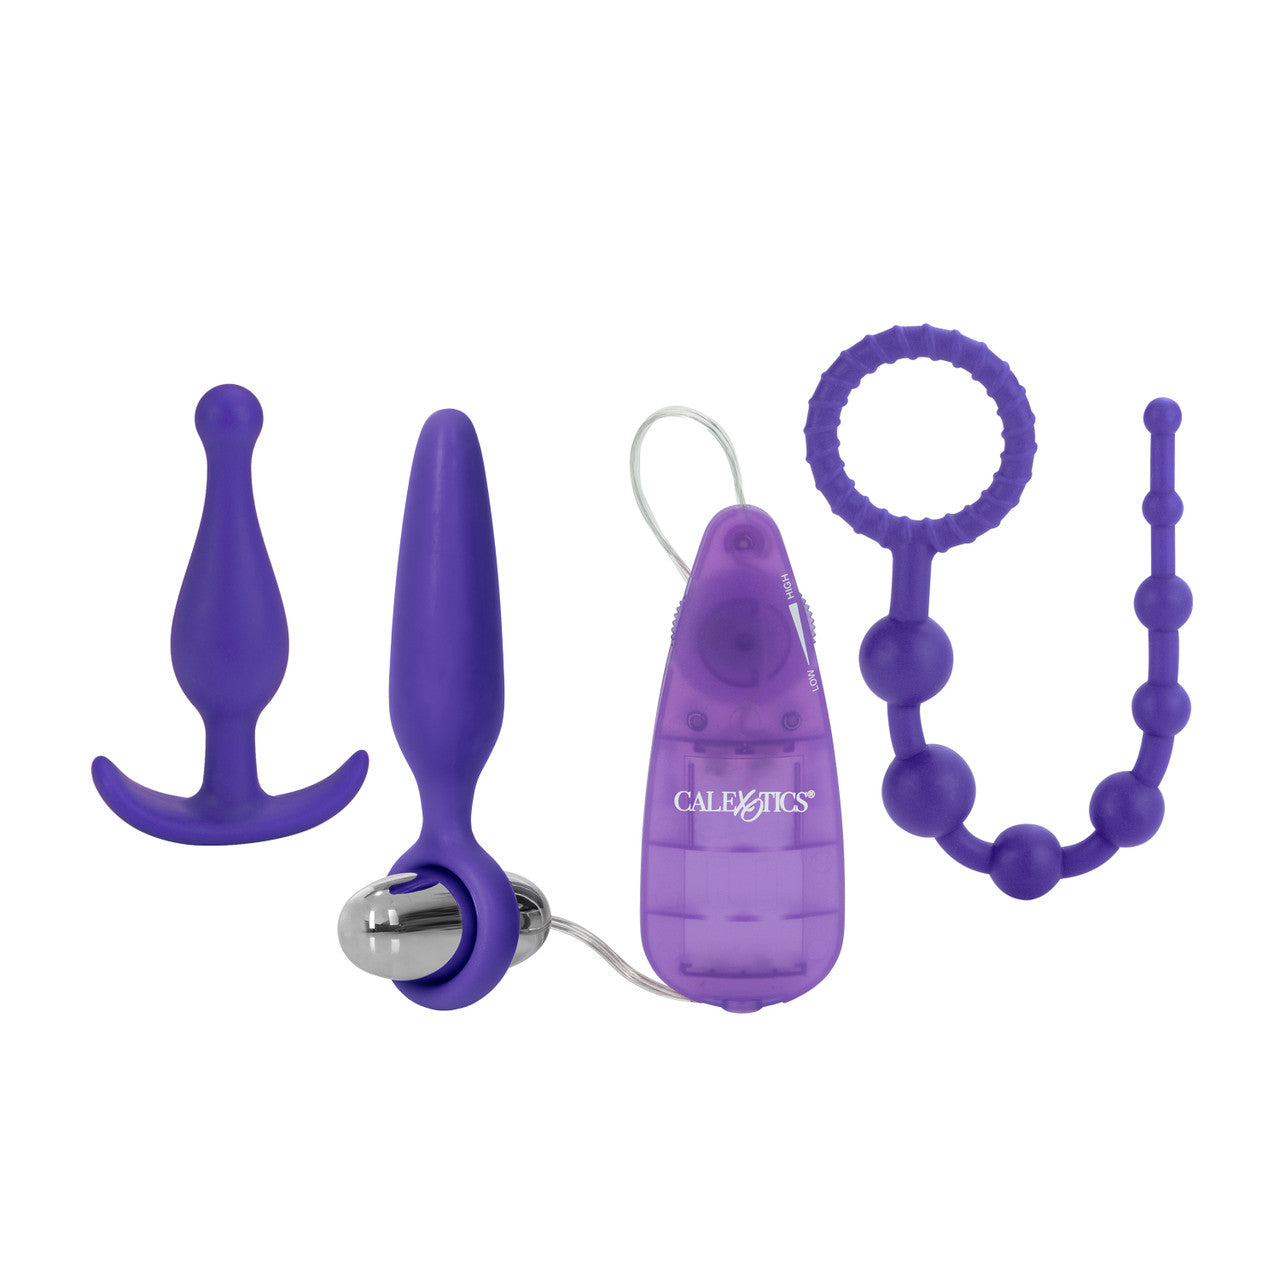 Her Anal Kit Silicone Rocker Probe and Beads Anal Vibrator